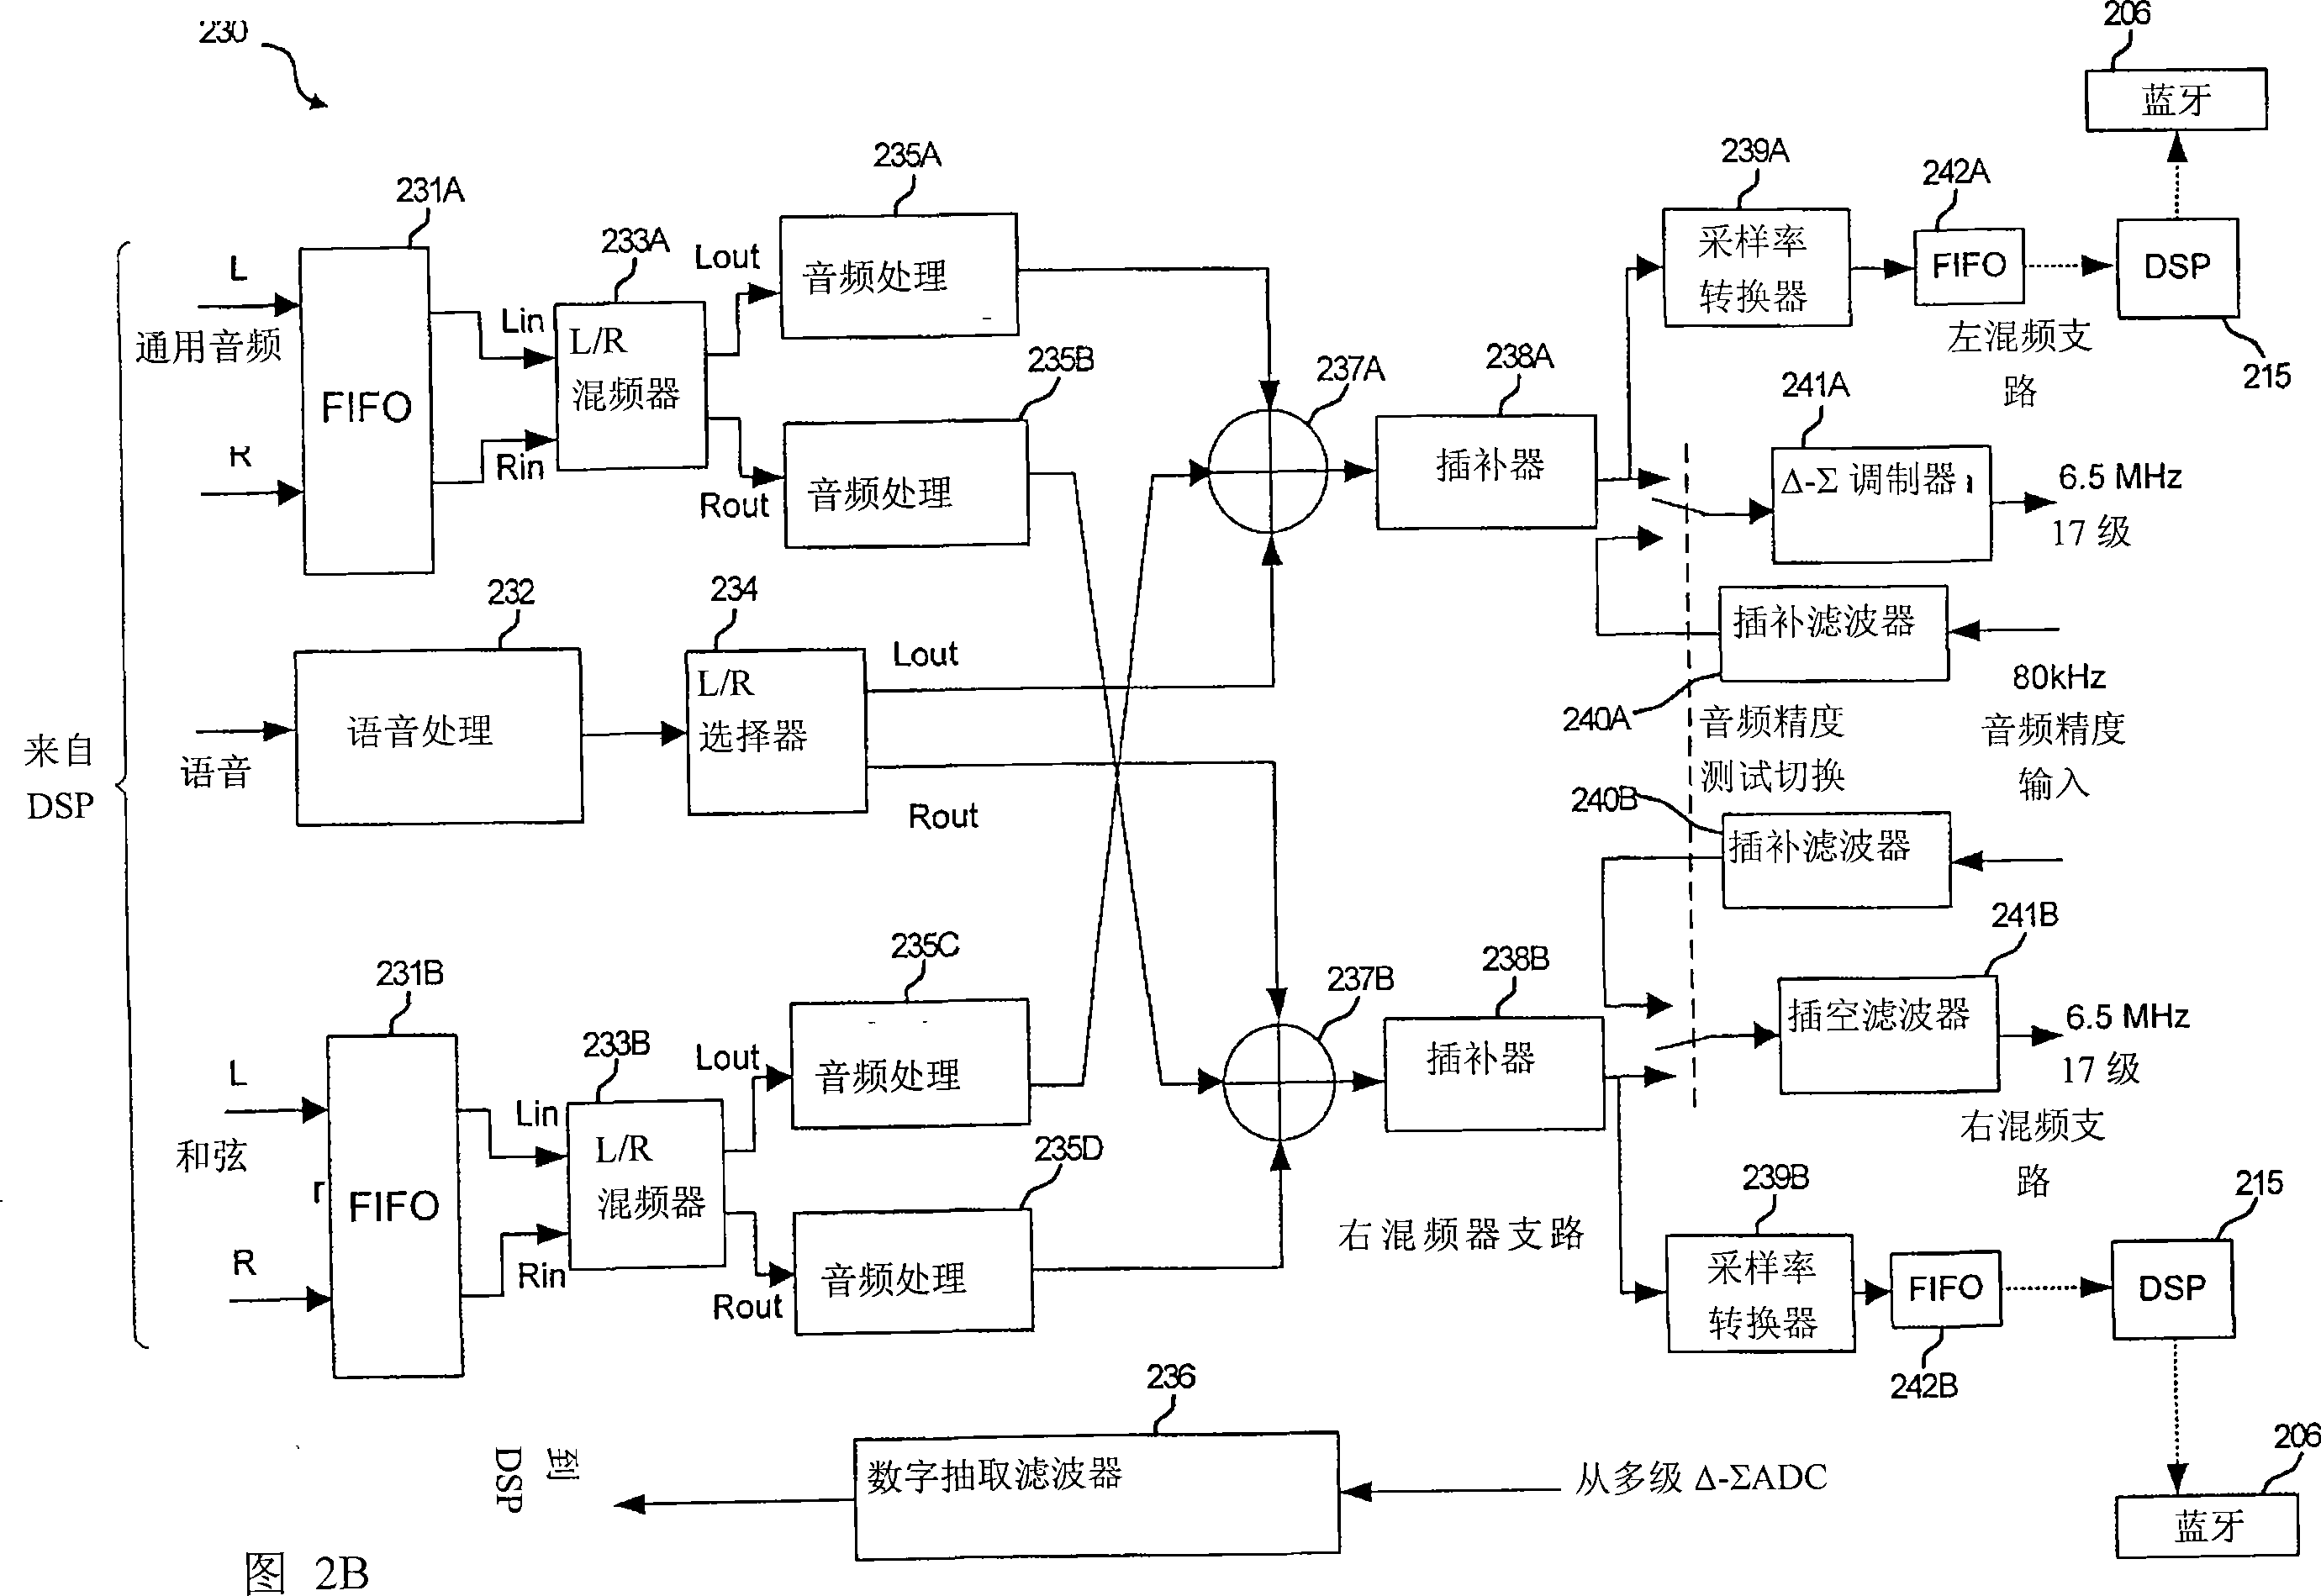 Method and system for processing multi-rate audio from a plurality of audio processing sources